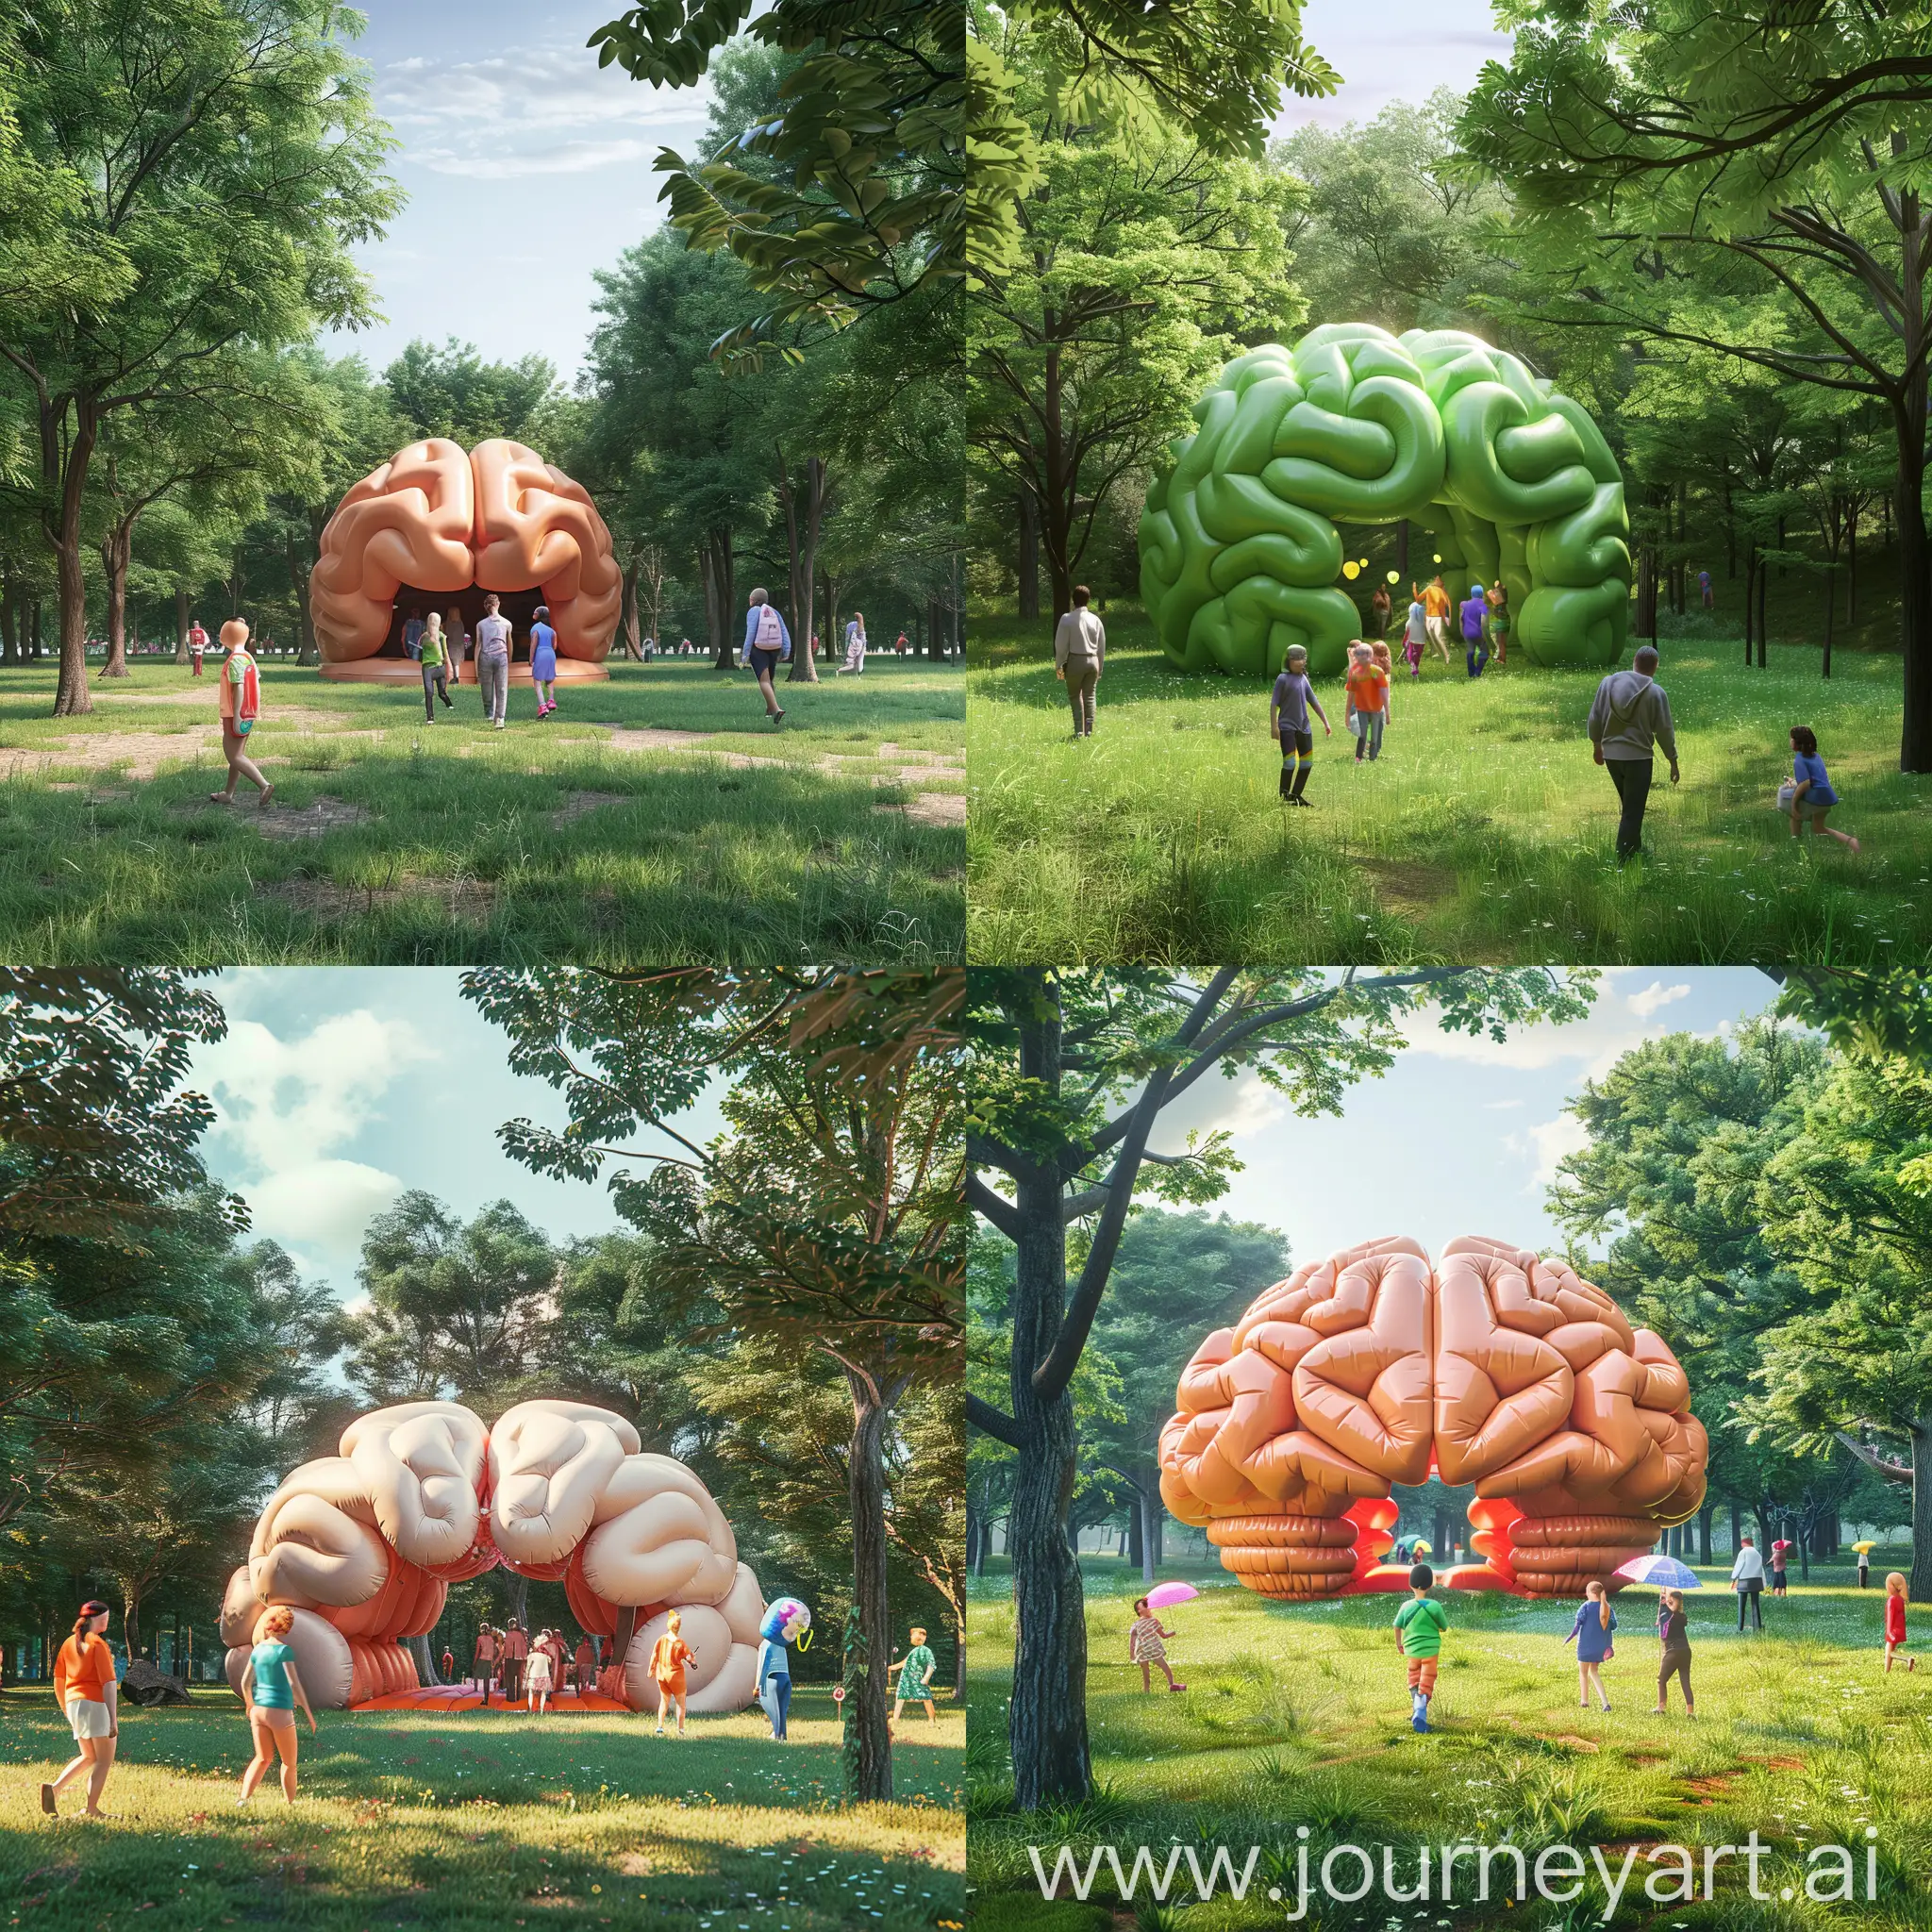 Colorful-People-Entering-BrainShaped-Inflatable-Structure-in-Meadow